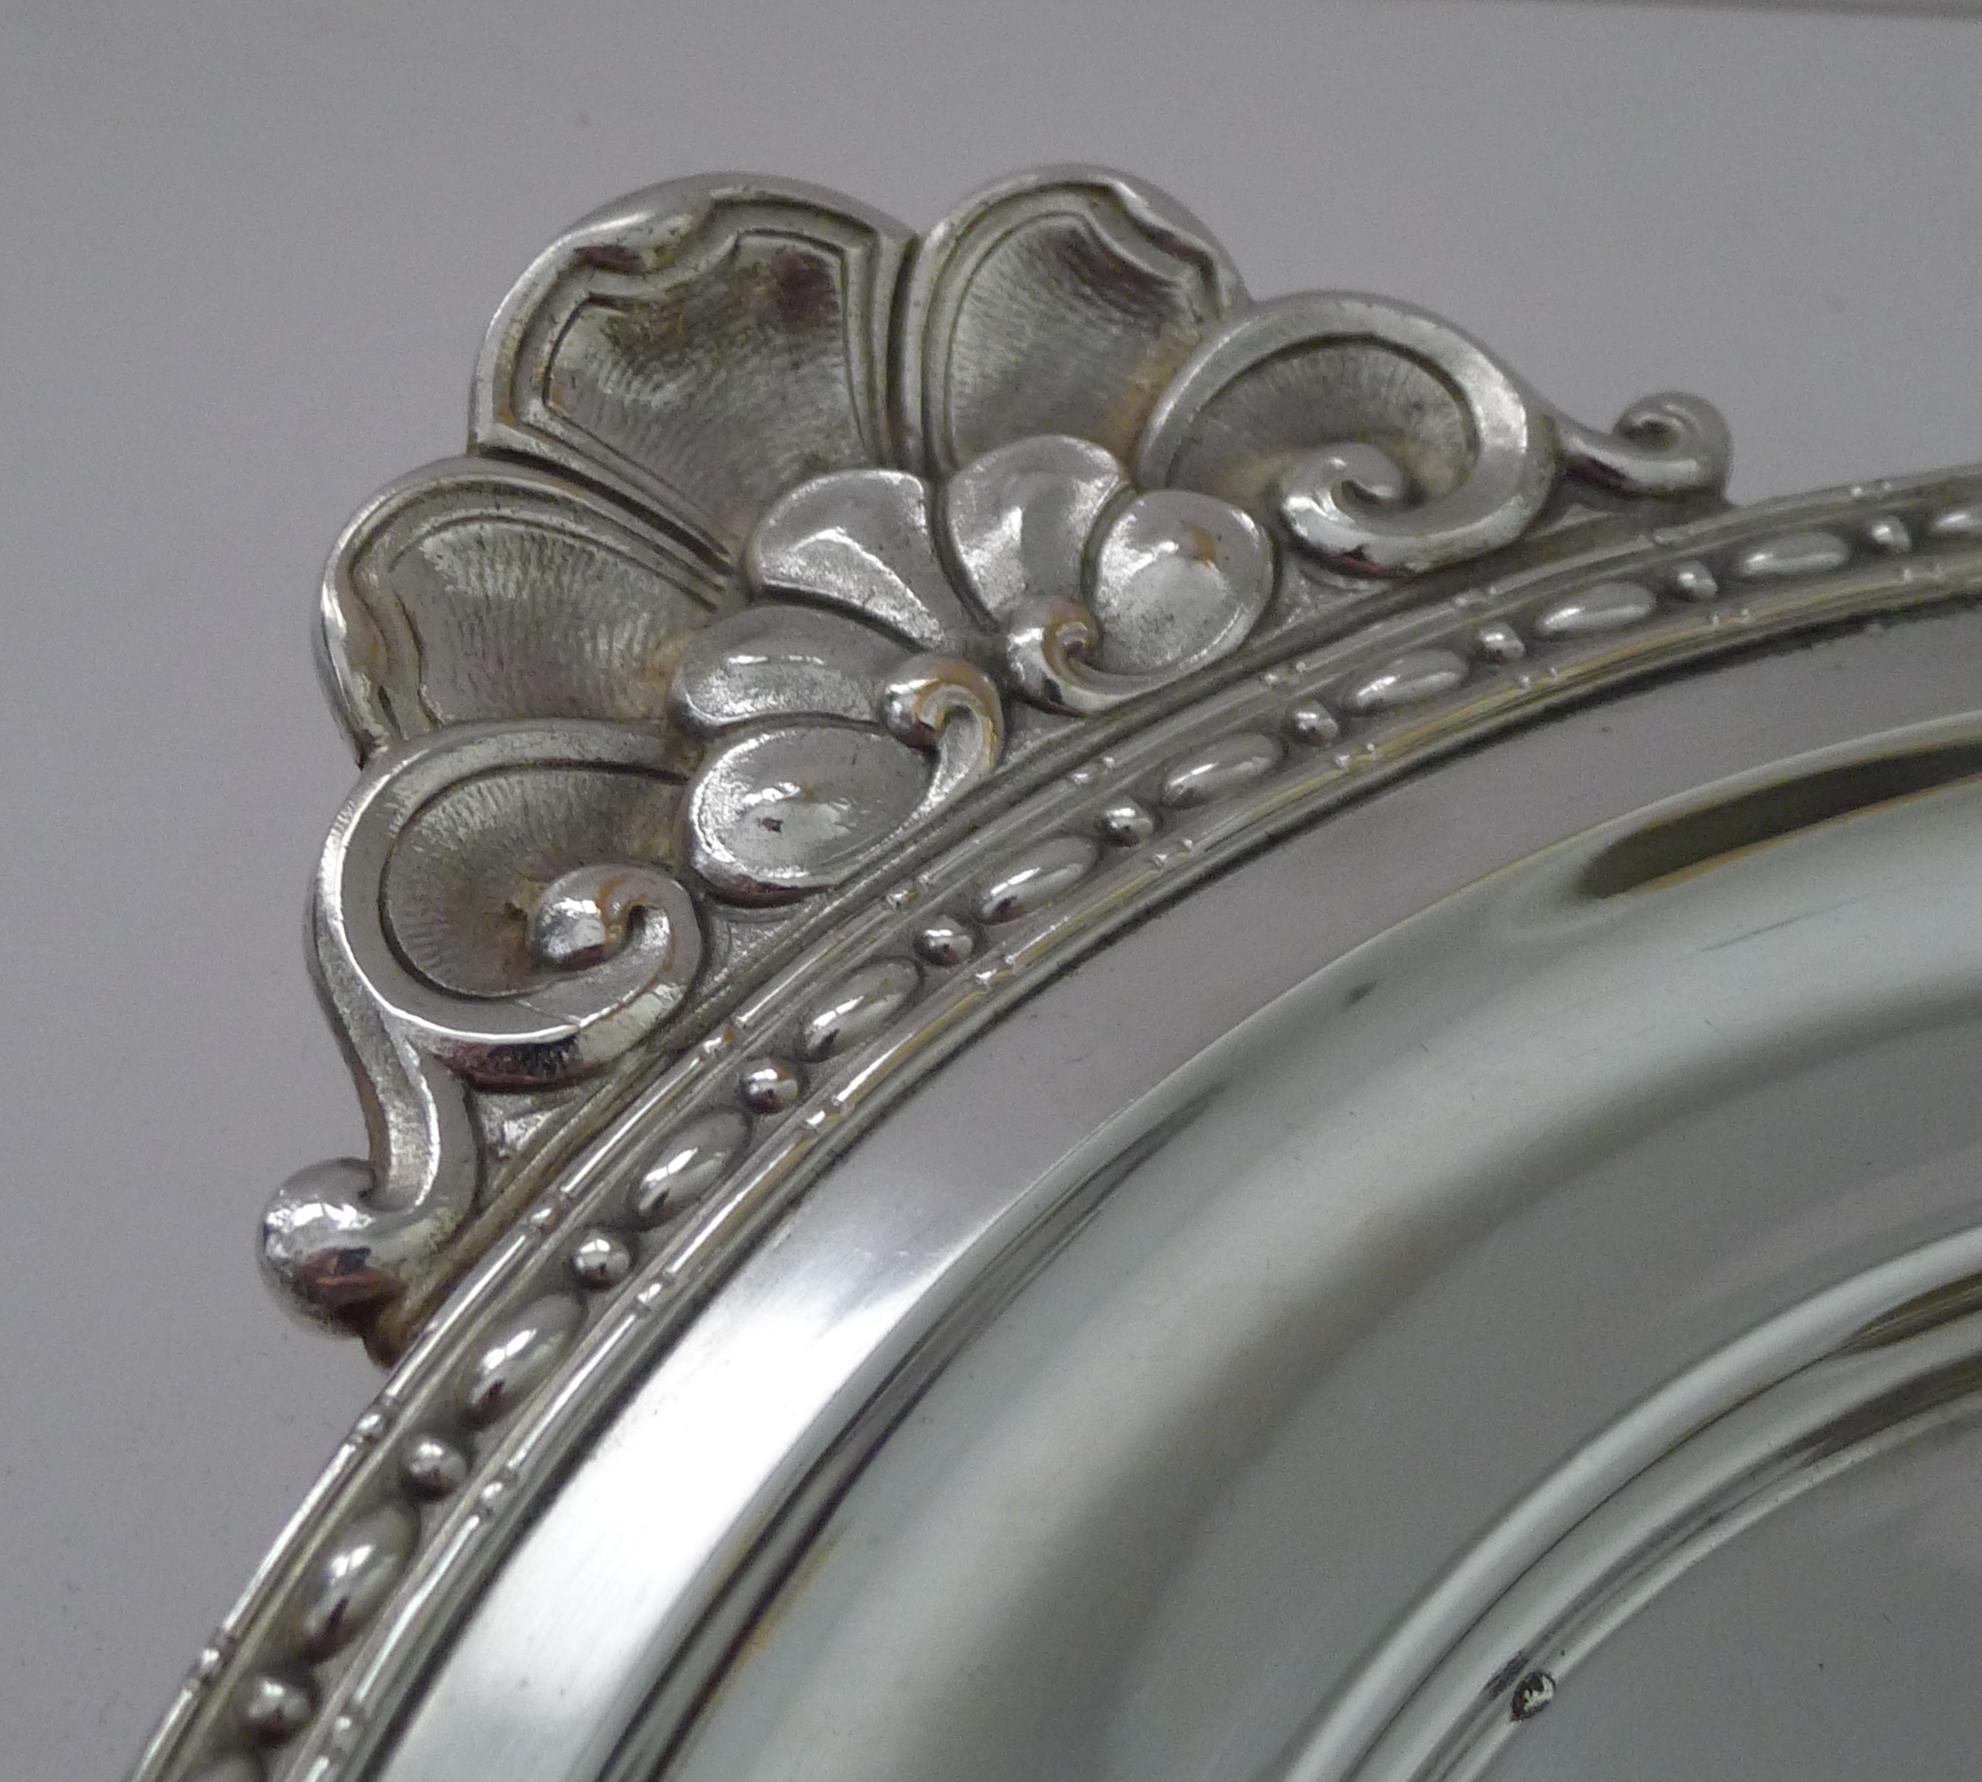 An elegant French silver plated handled tray made in silver plate in a wonderful Art nouveau design.

Professionally cleaned and polished by our silversmiths, restoring it to it's former glory ( a few stubborn marks remain commensurate with age and